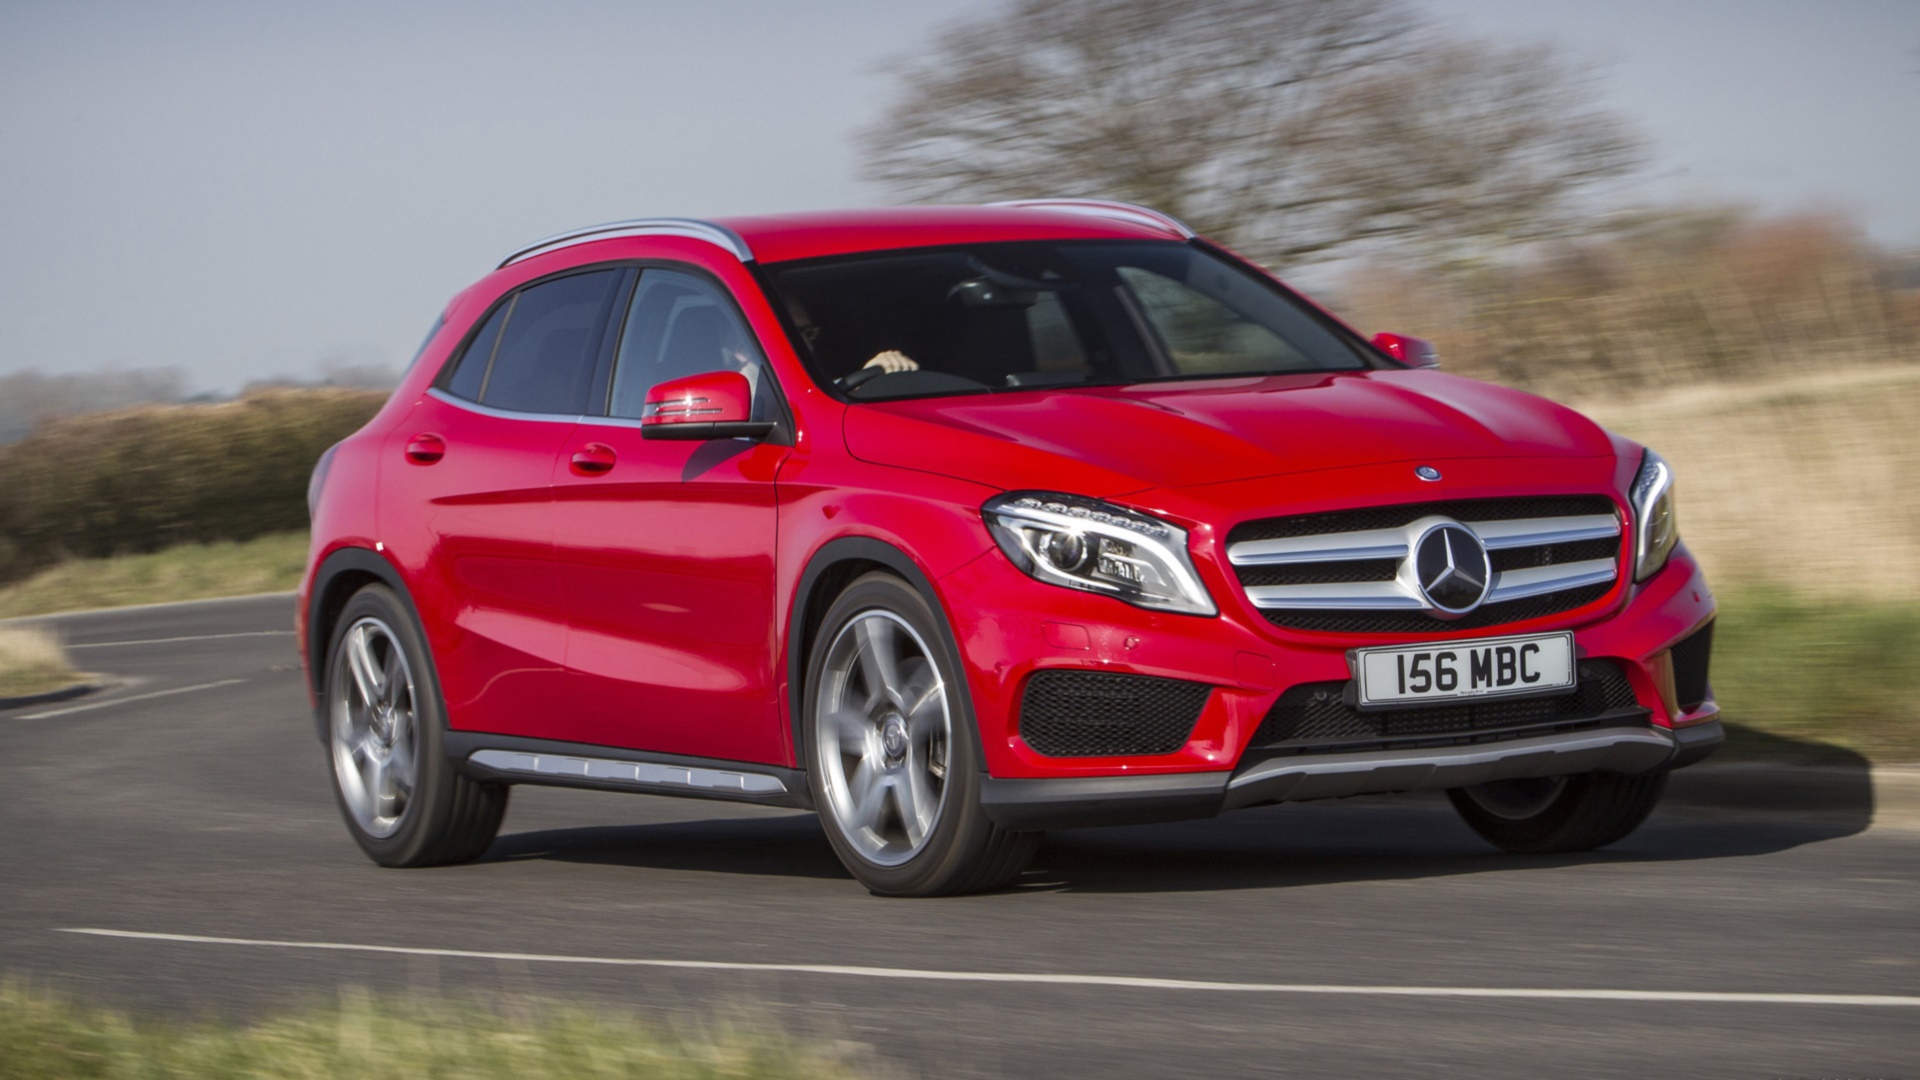 Download mobile wallpaper Mercedes Benz Gla Class, Mercedes Benz, Vehicles for free.